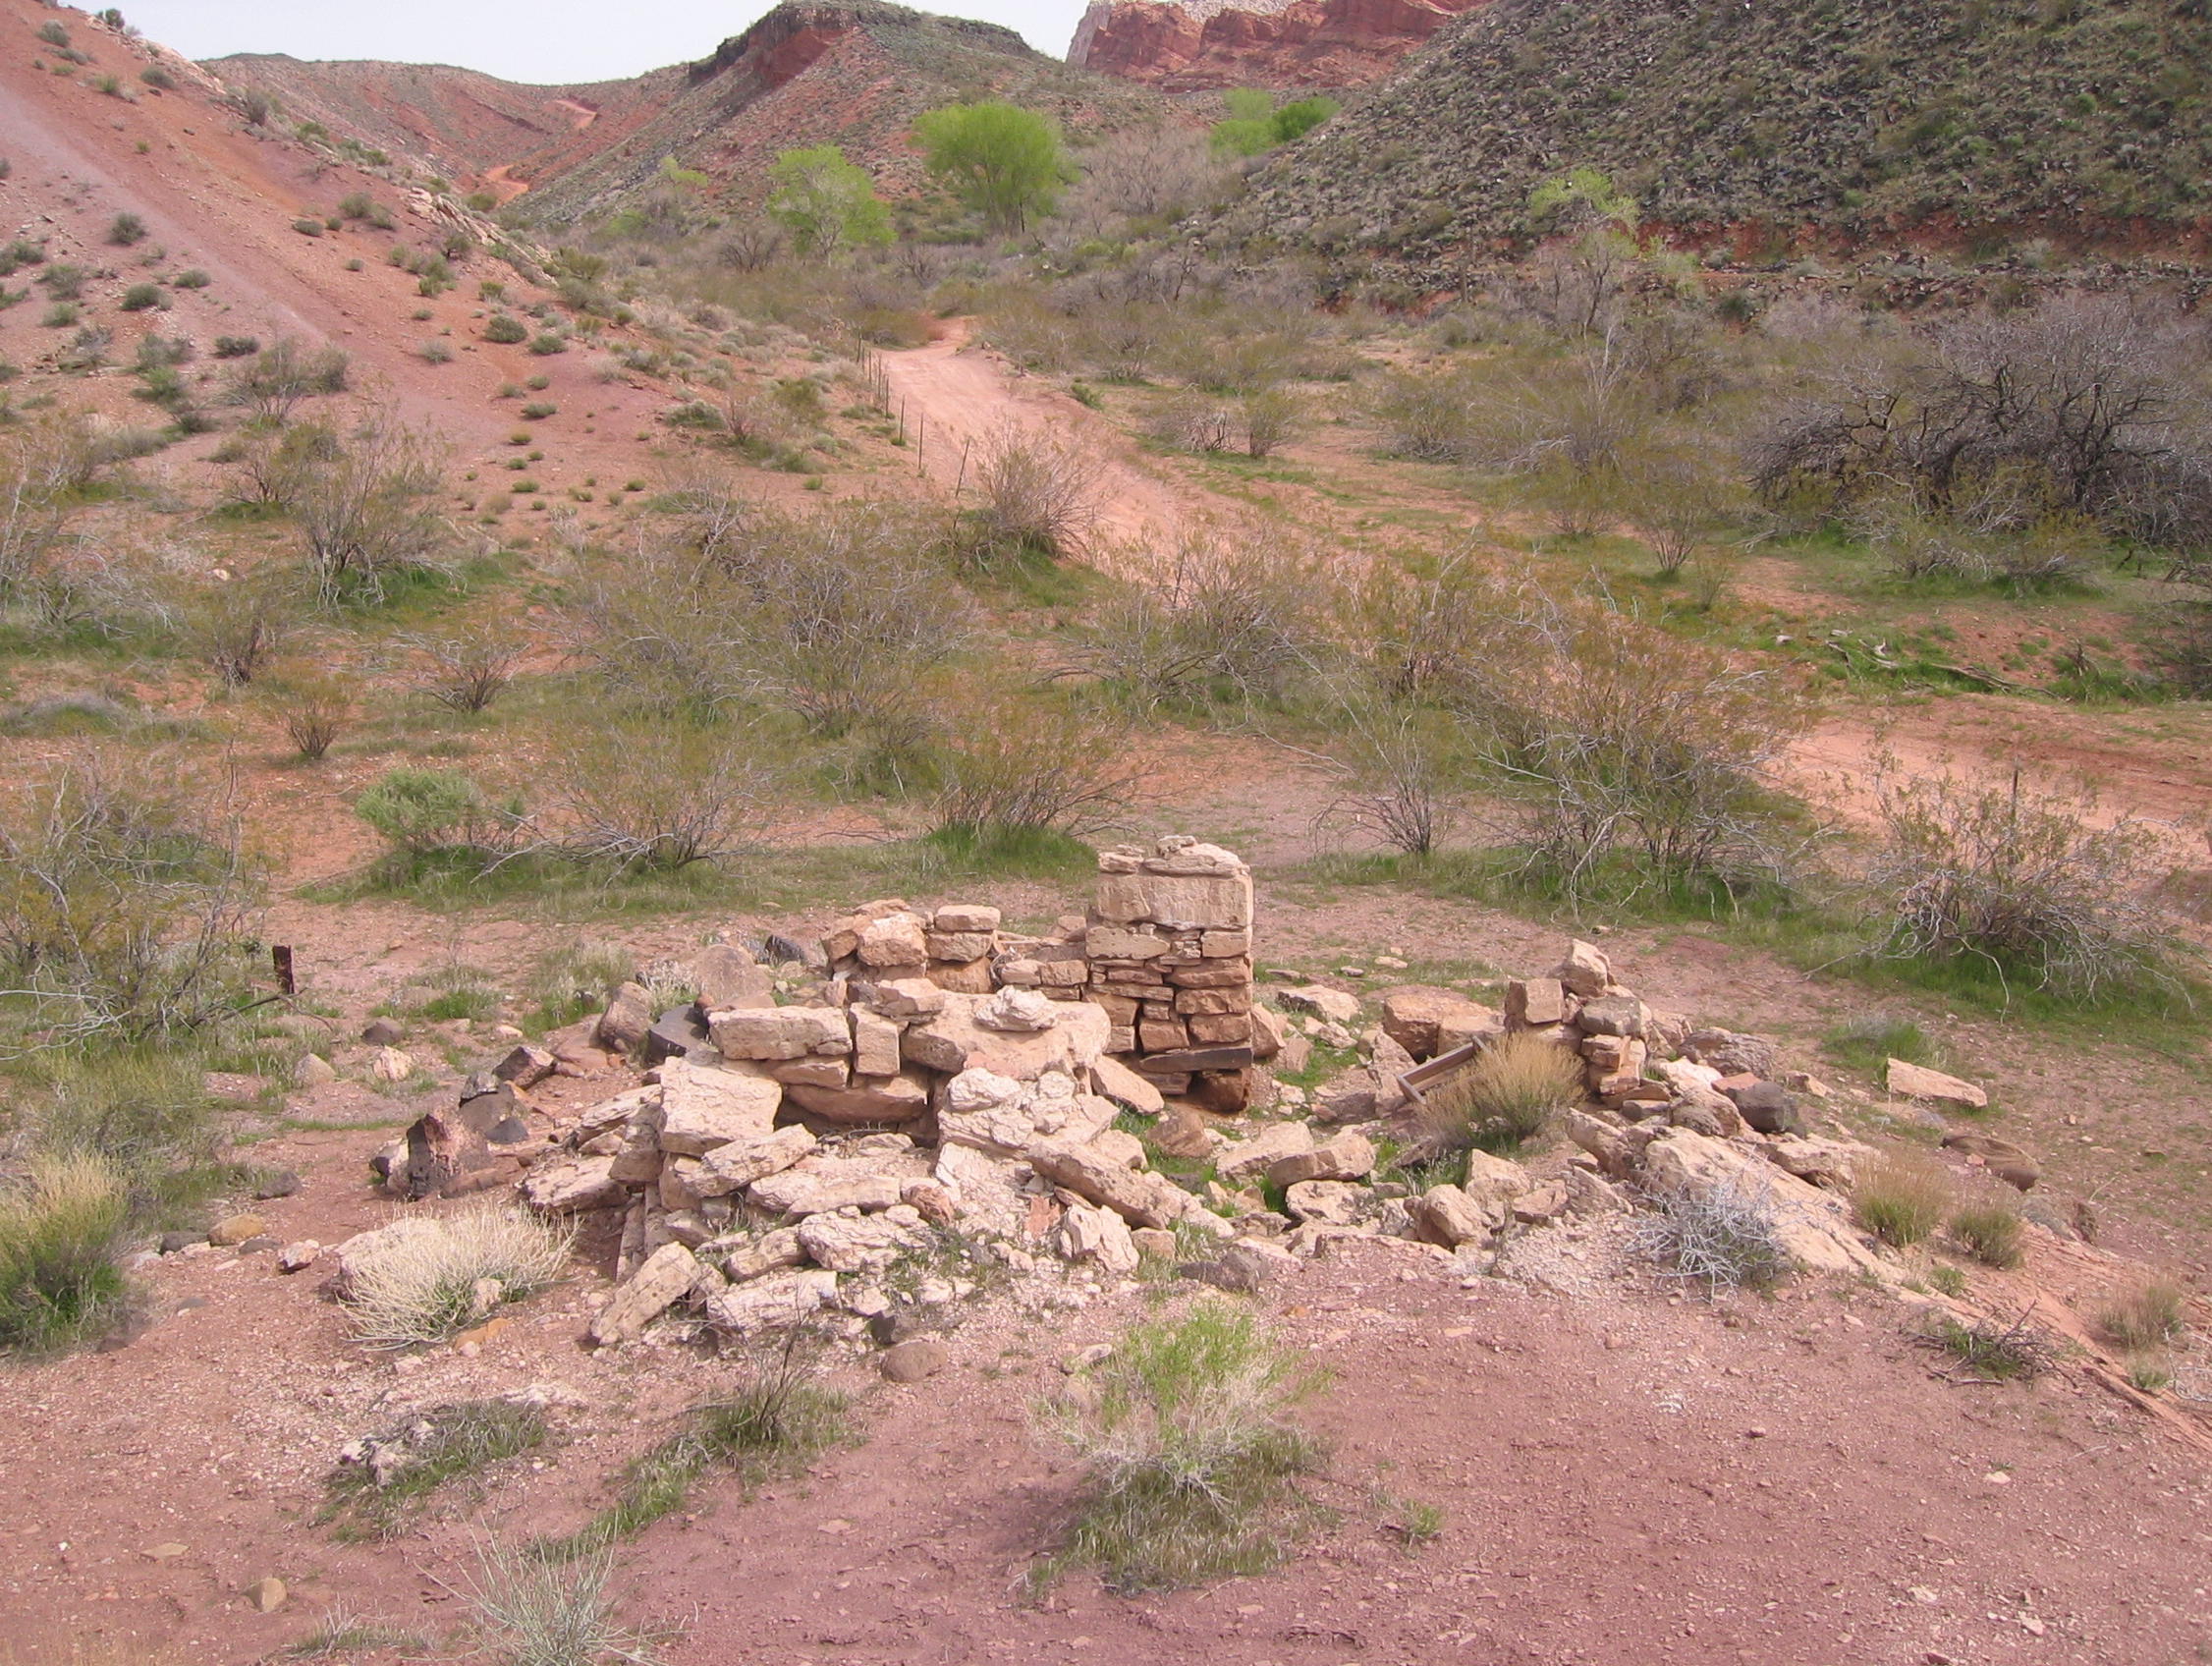 Remains of an old rock house